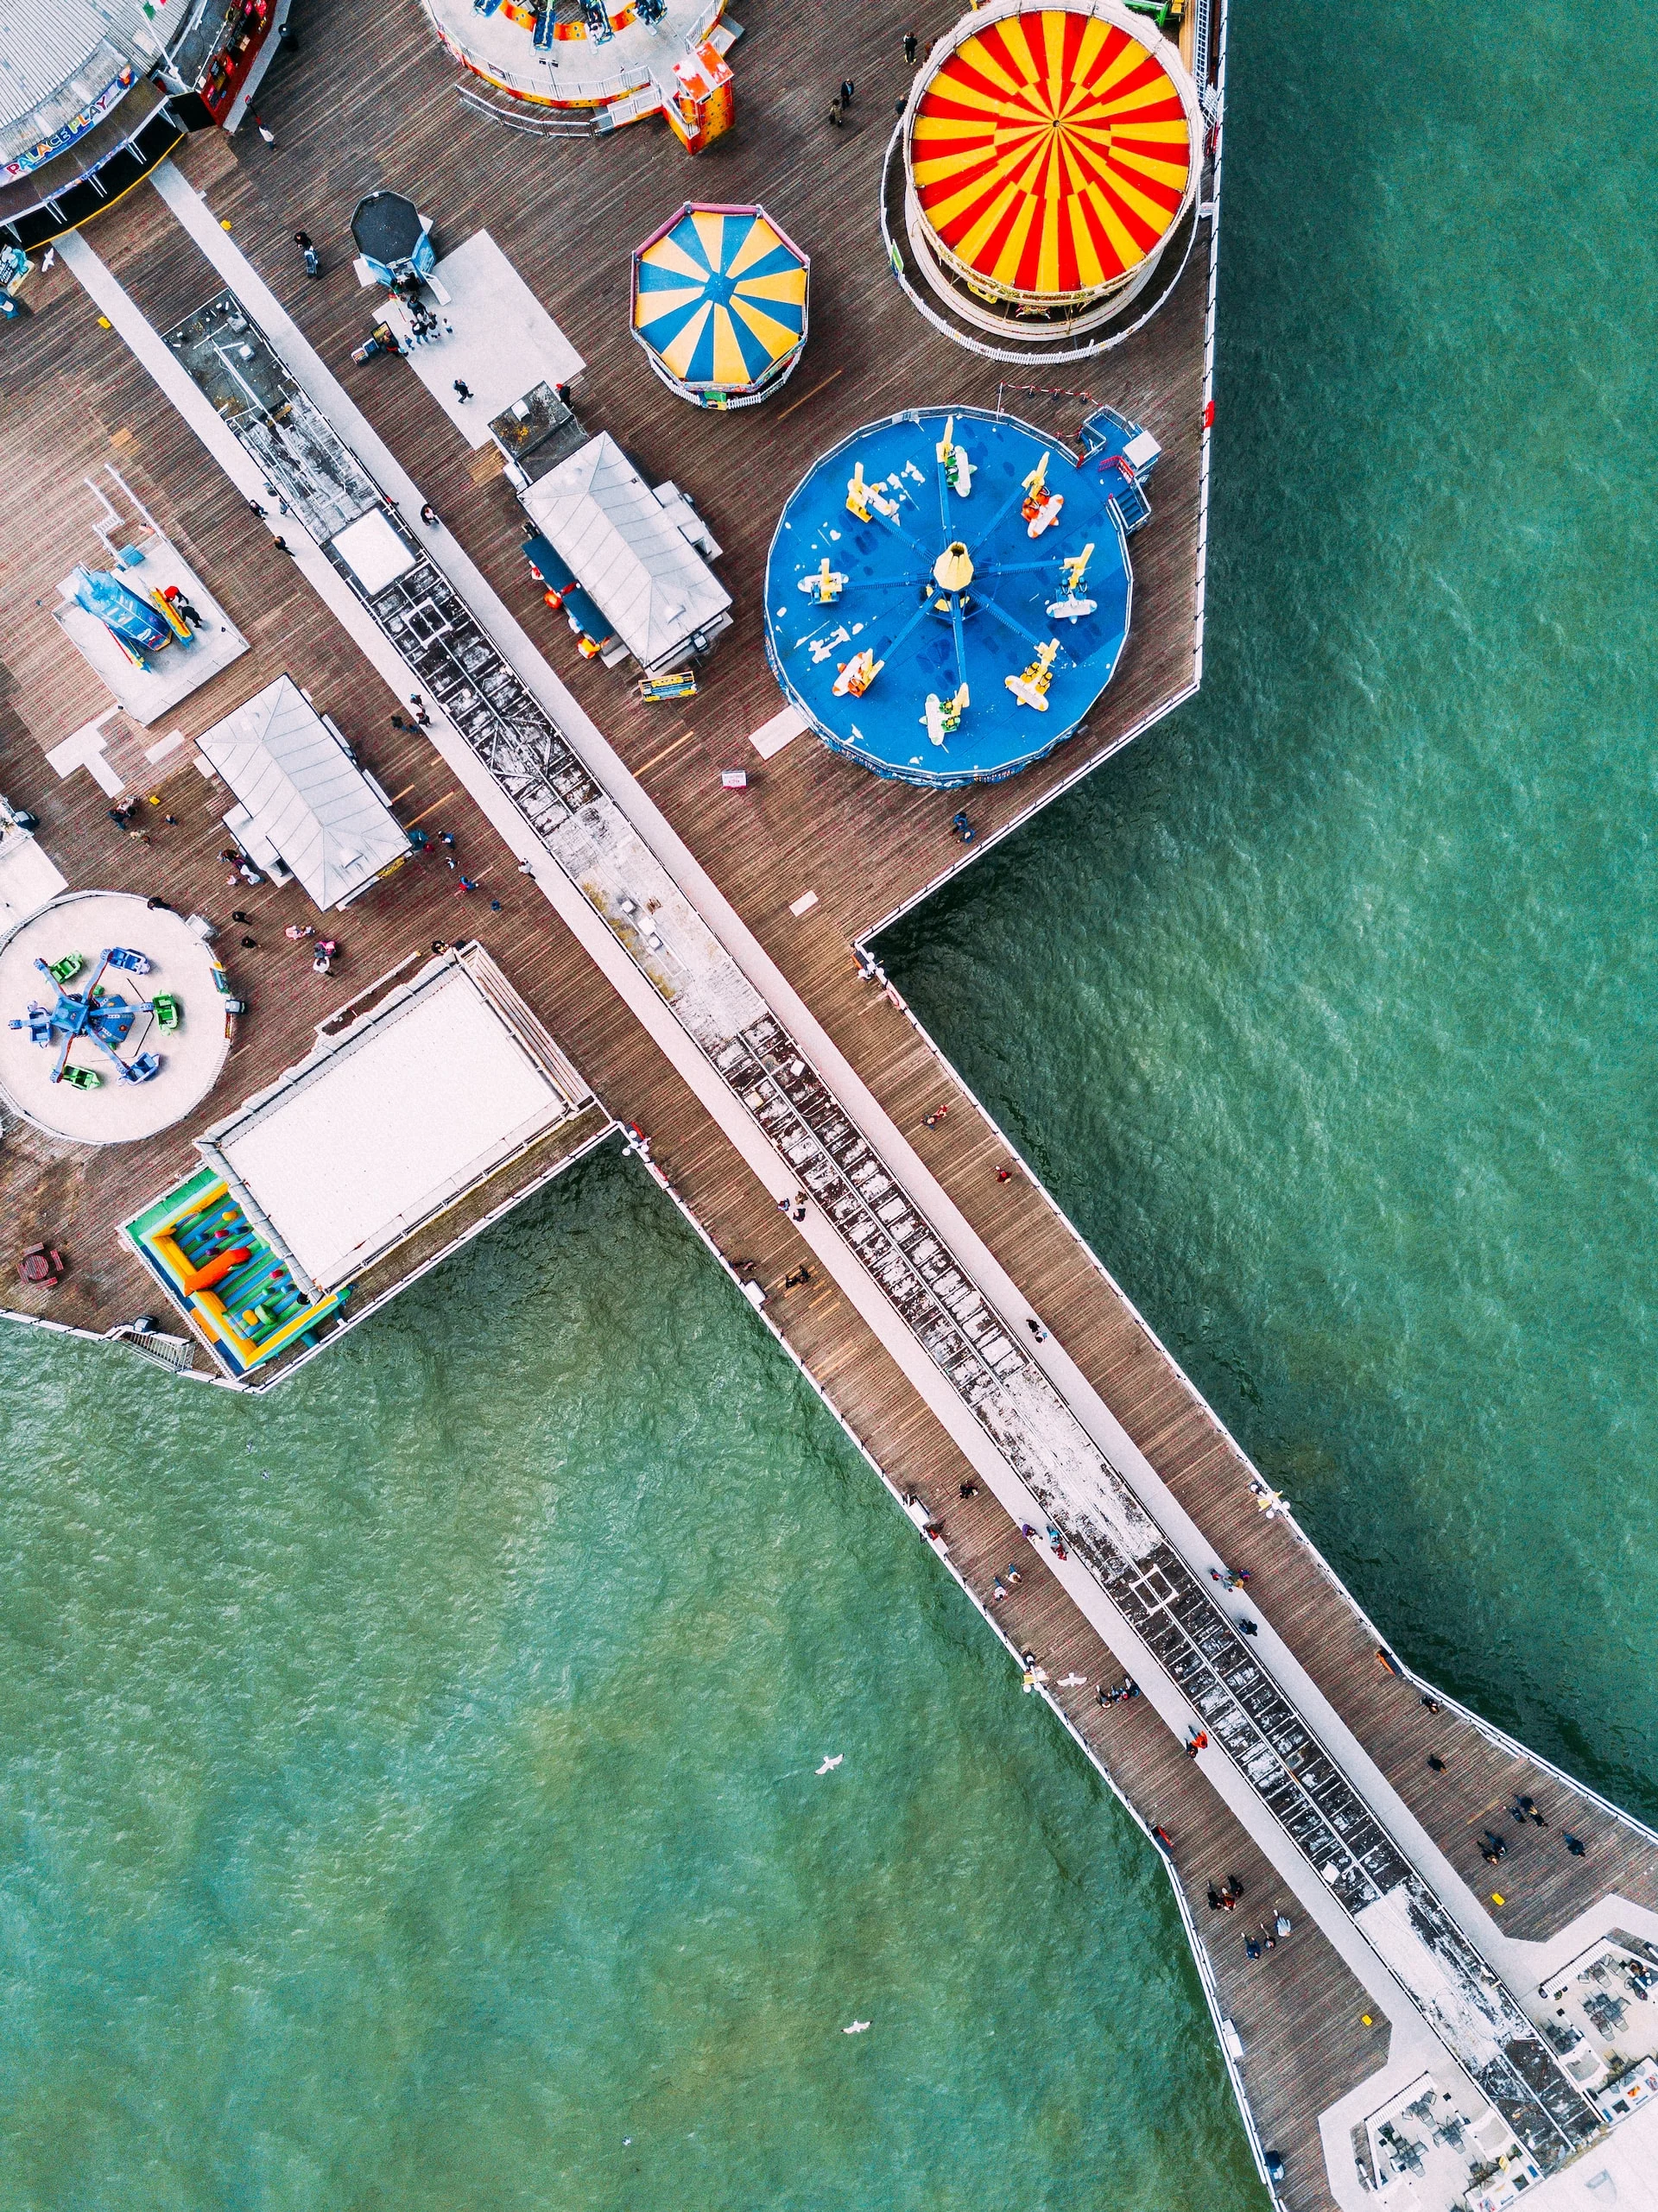 birds eye view on a pier with carousels and other attractions on it